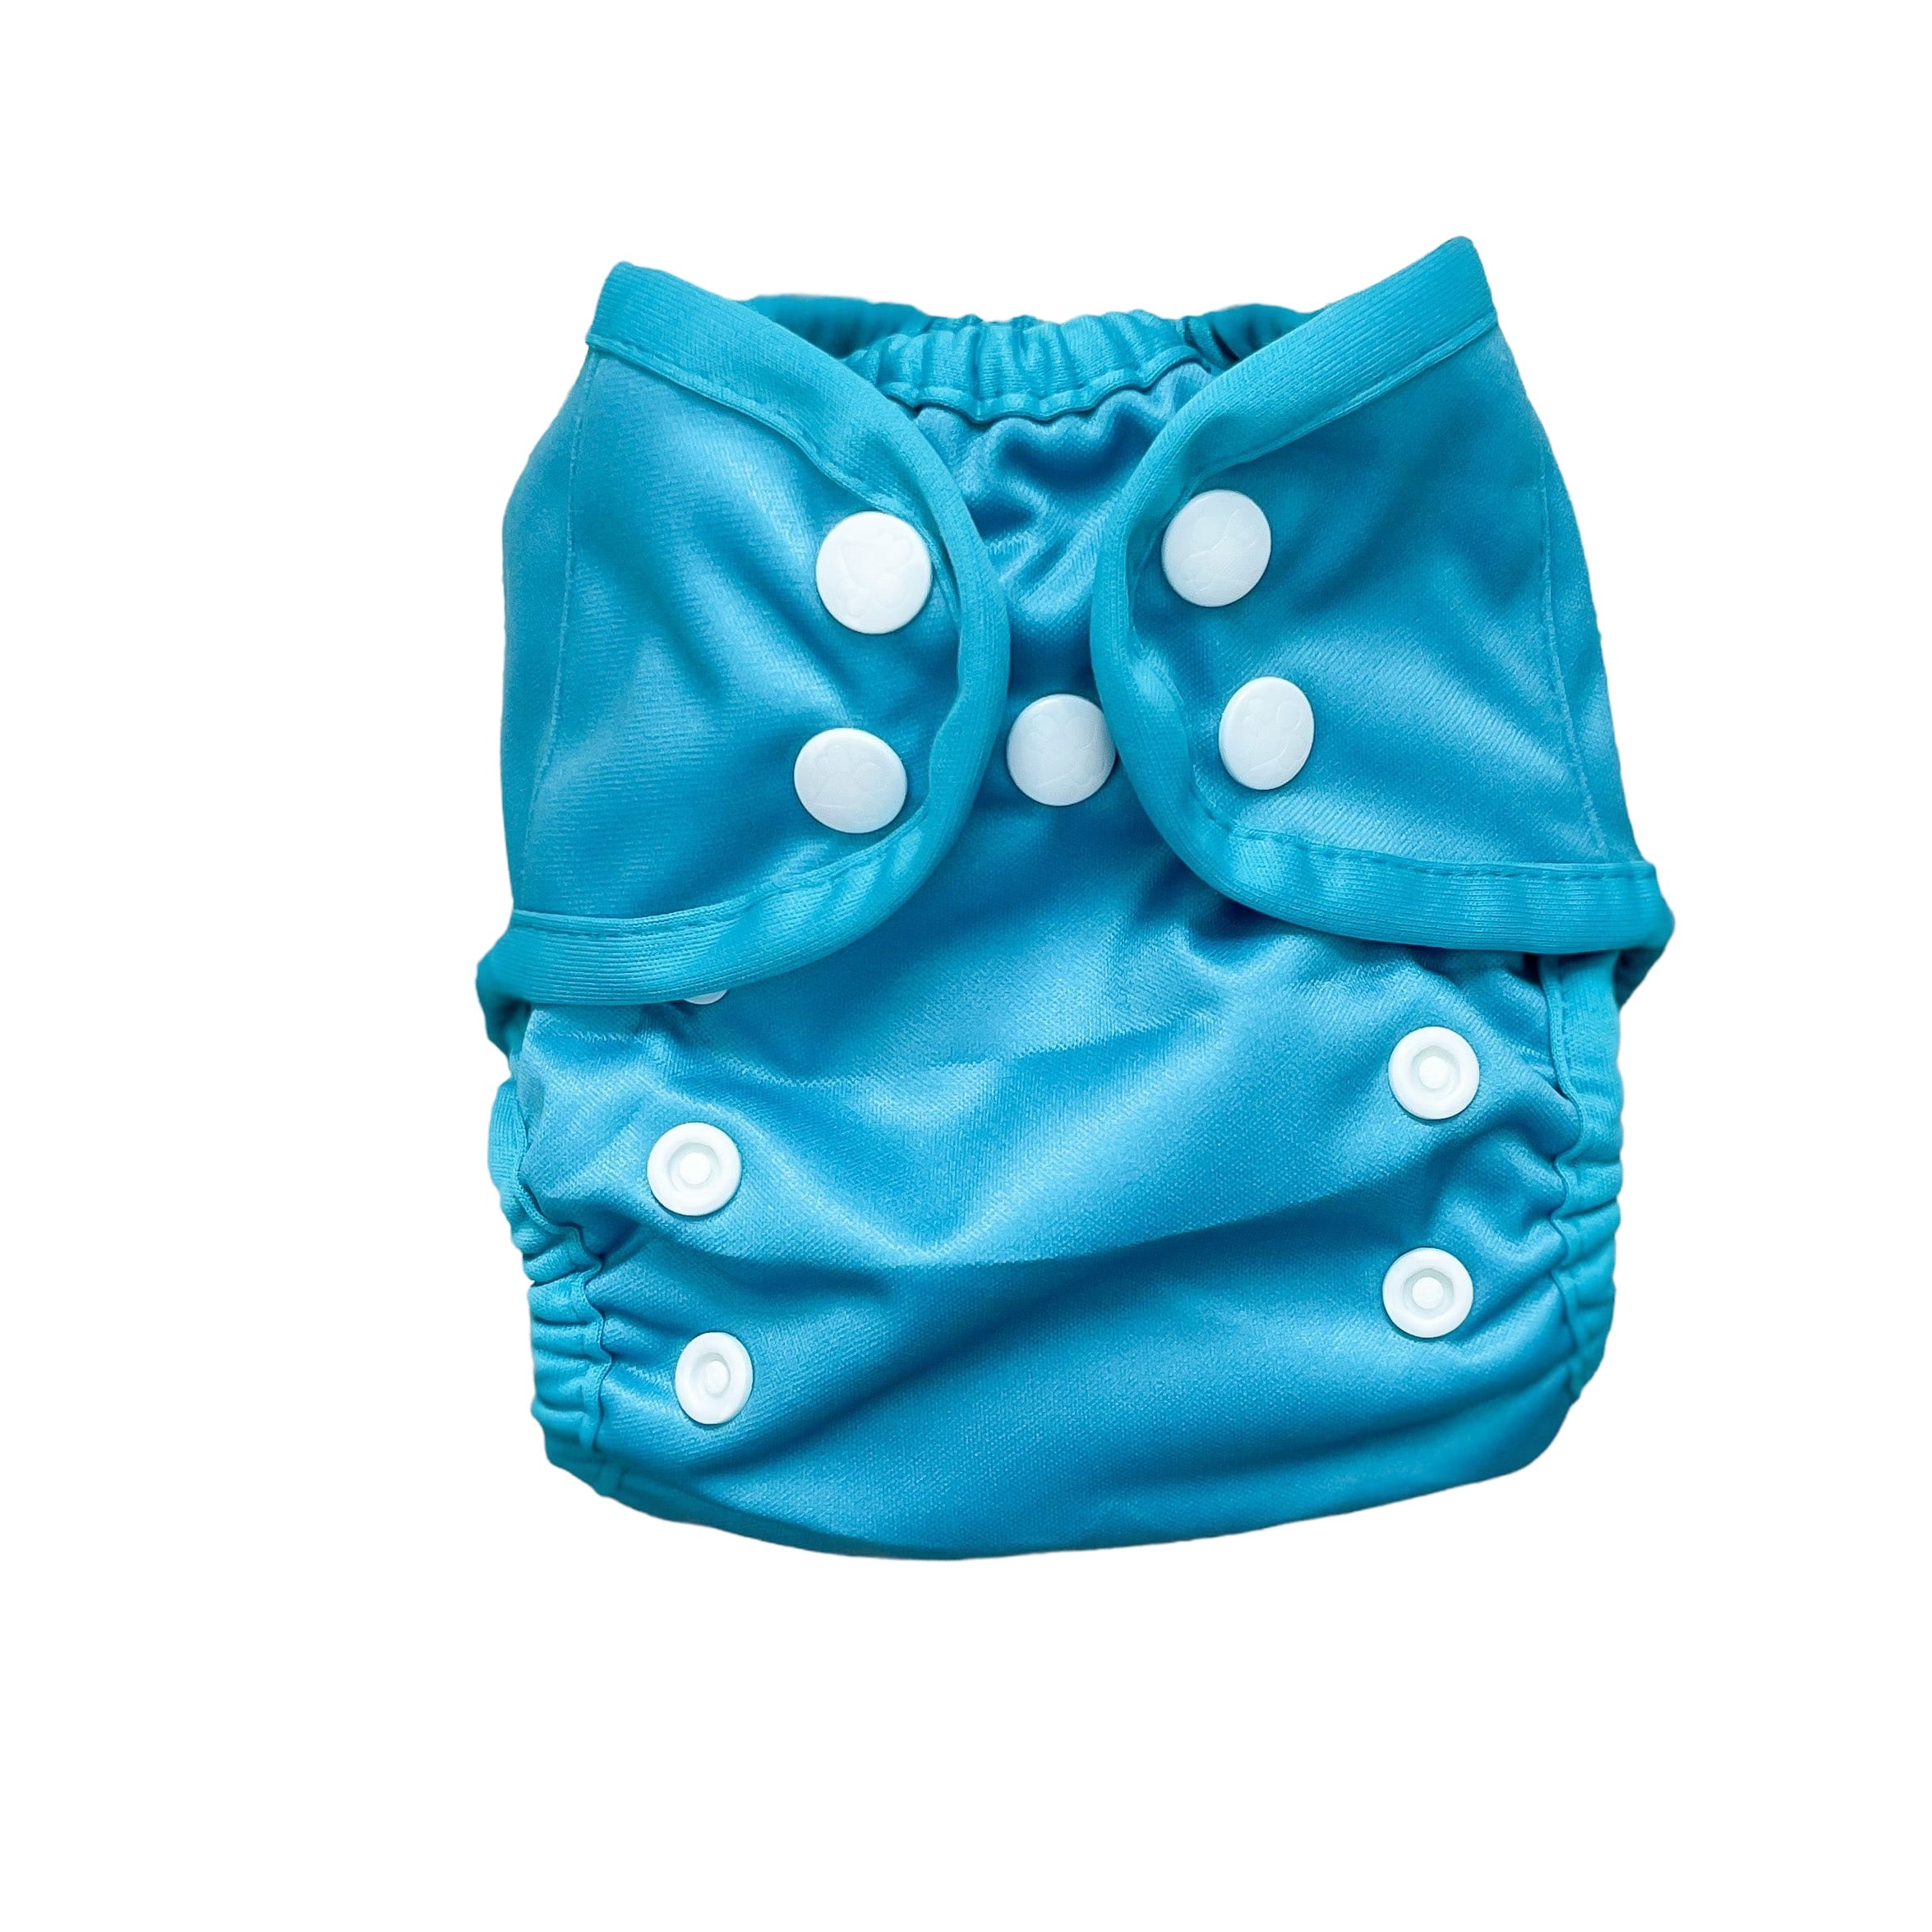 The "bally"  Newborn Diaper Cover By Happy Beehinds - Colors